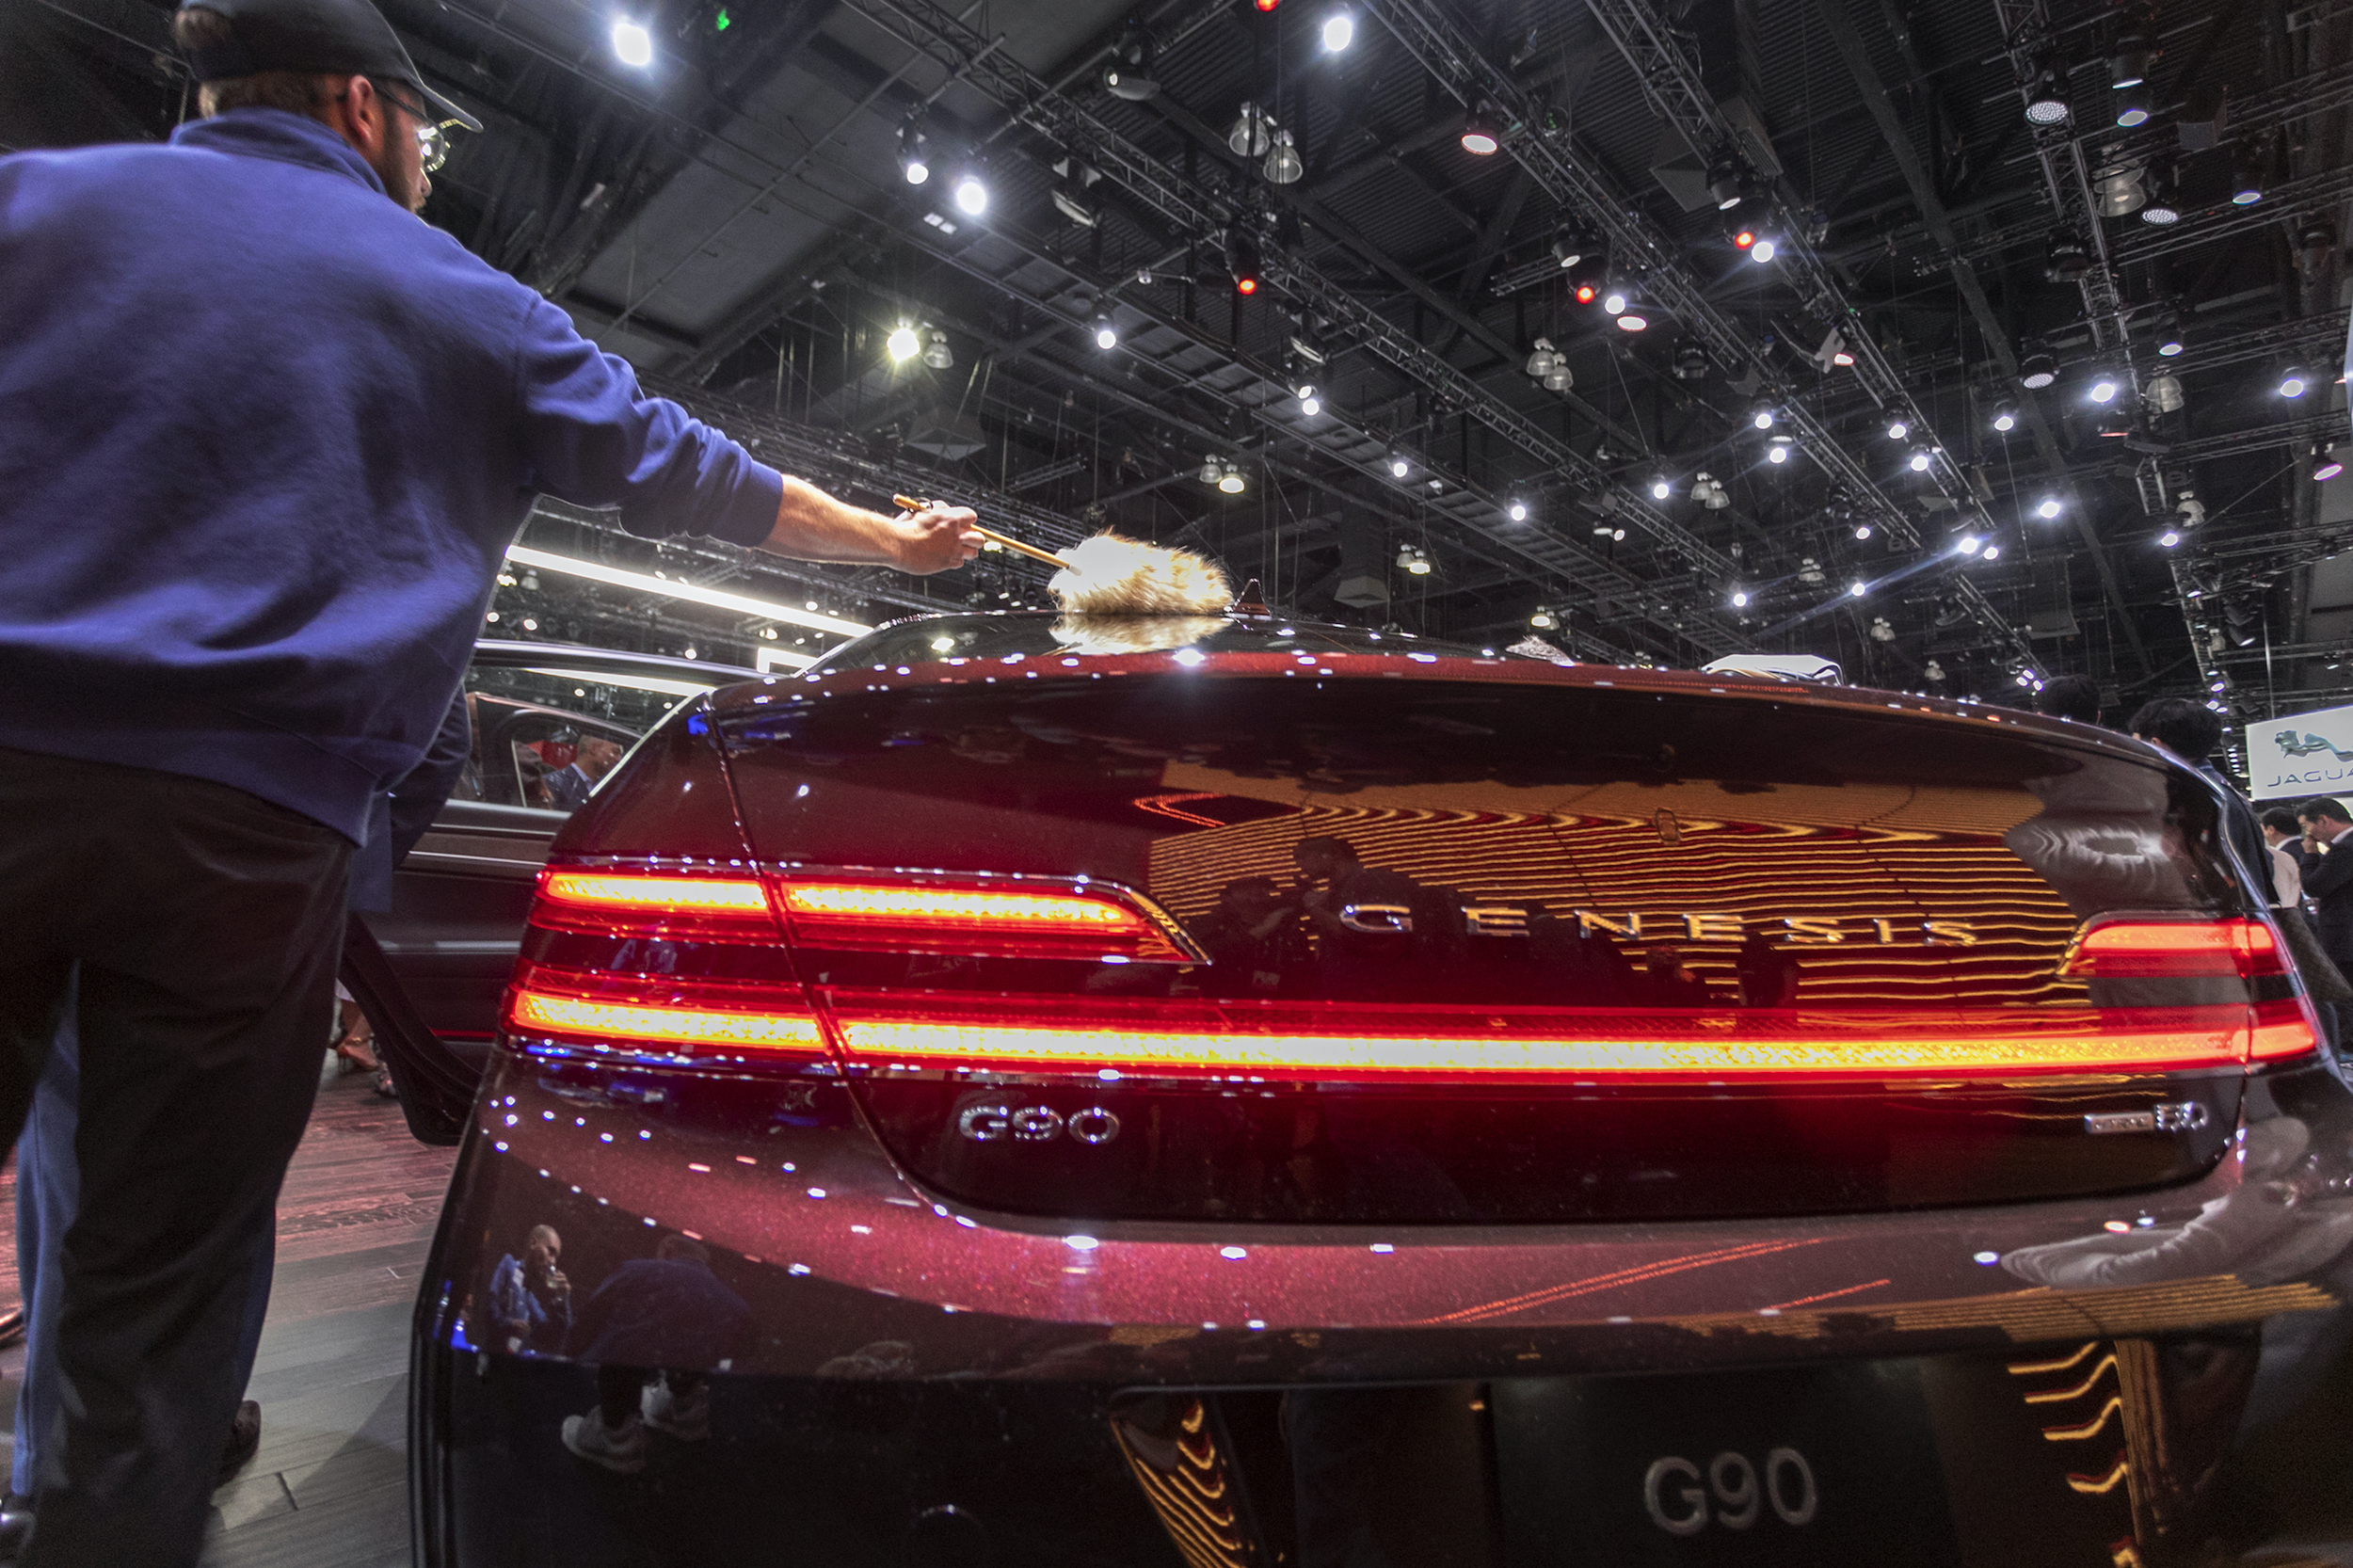 A man dusts the new-unveiled Genesis G90 at AutoMobility LA